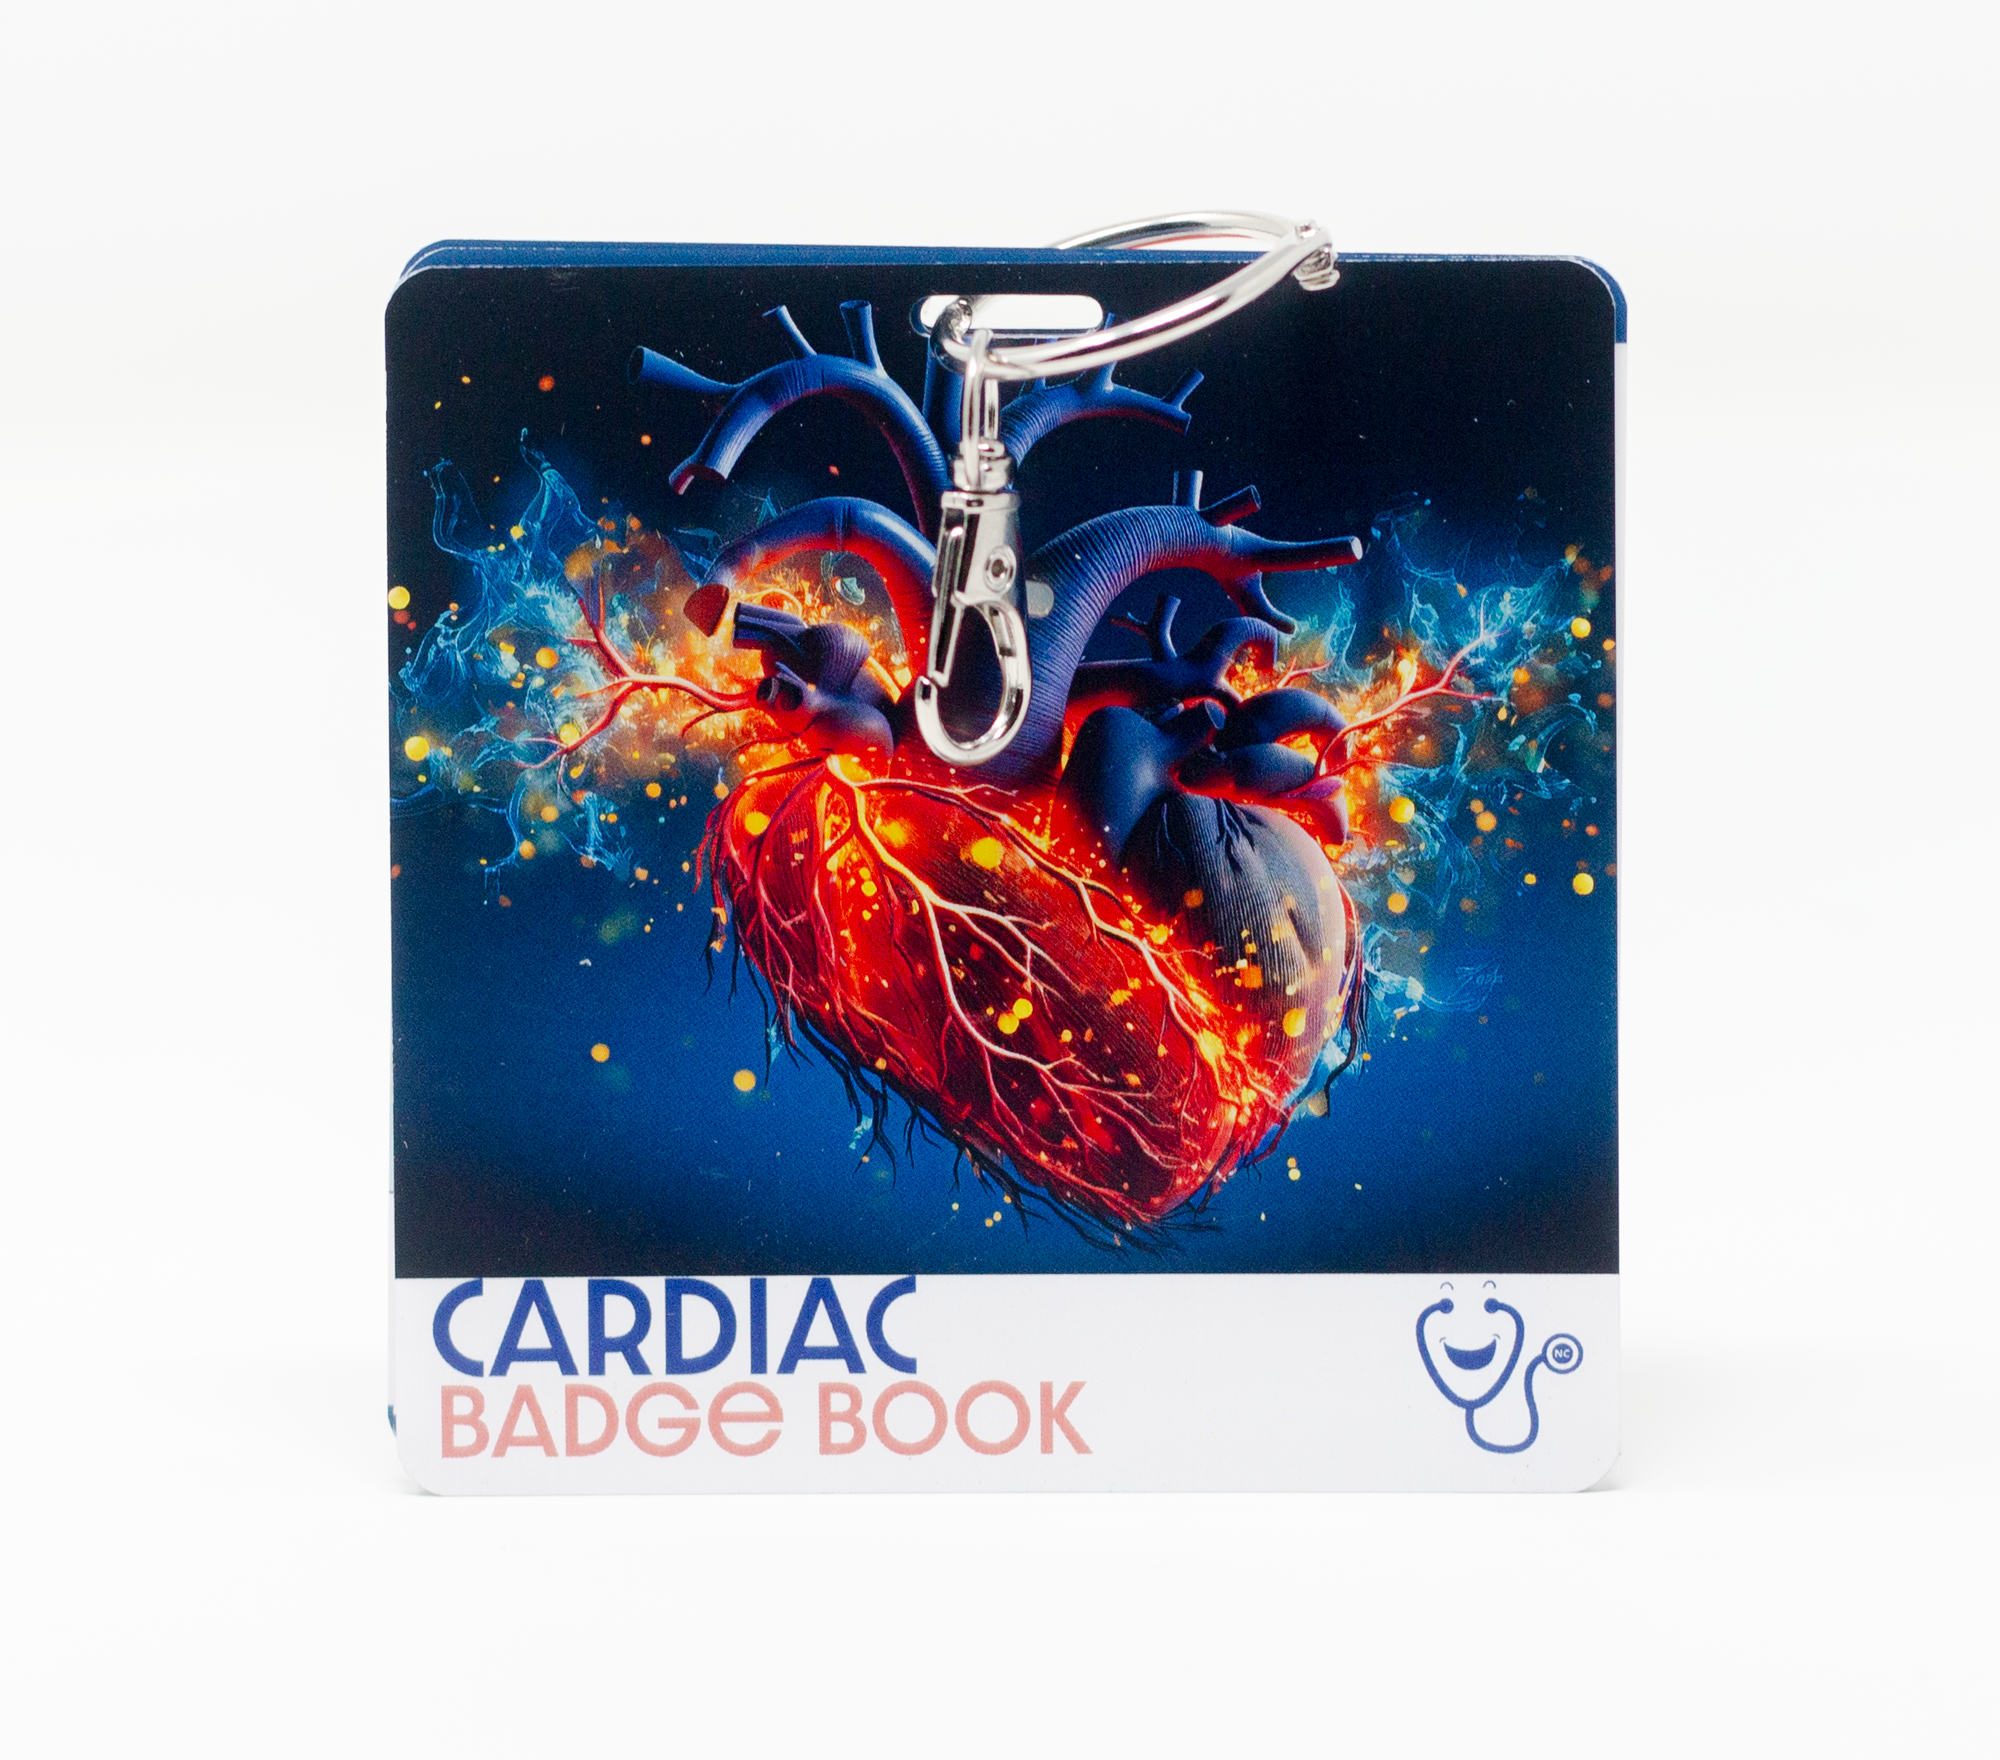 The standard edition of our cardiac badge book contains EKG tips, EKG Rhythms, Bradycardia, Tachycardia, MI, Levophed, and Cardiac Drips.  (Our drips section has been confirmed by a board-certified Pharmacist).